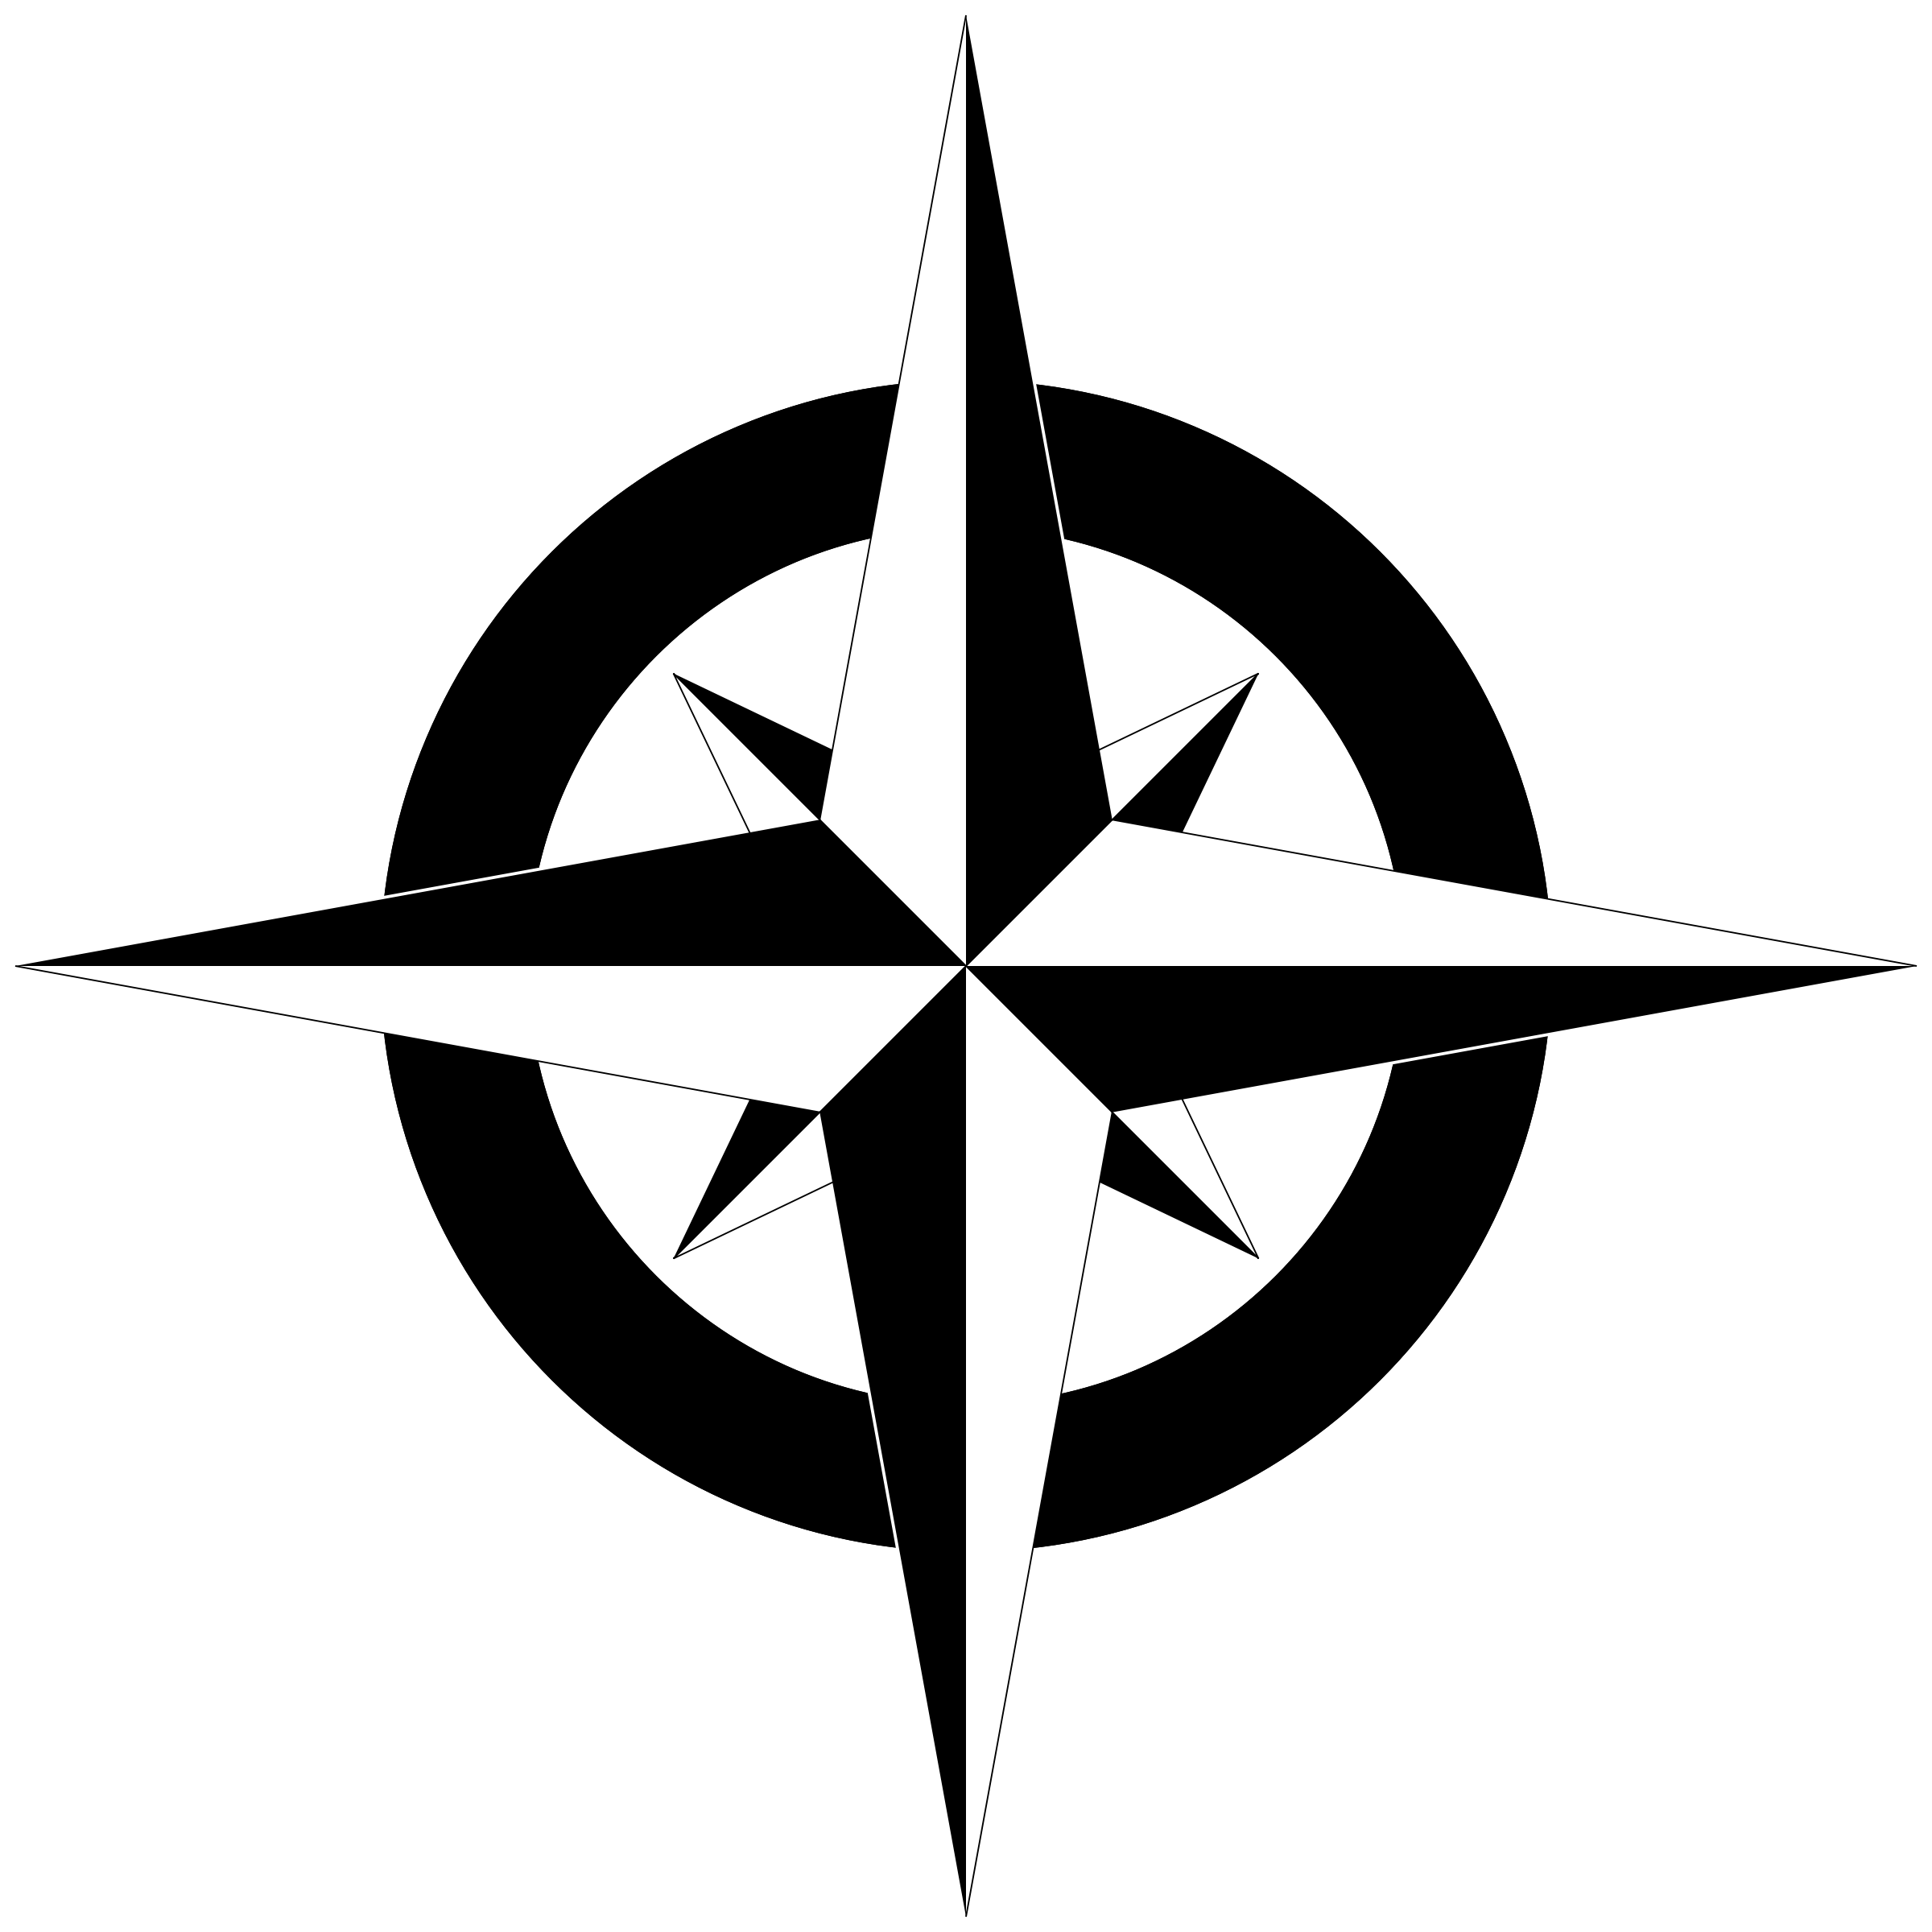 free-simple-compass-rose-download-free-simple-compass-rose-png-images